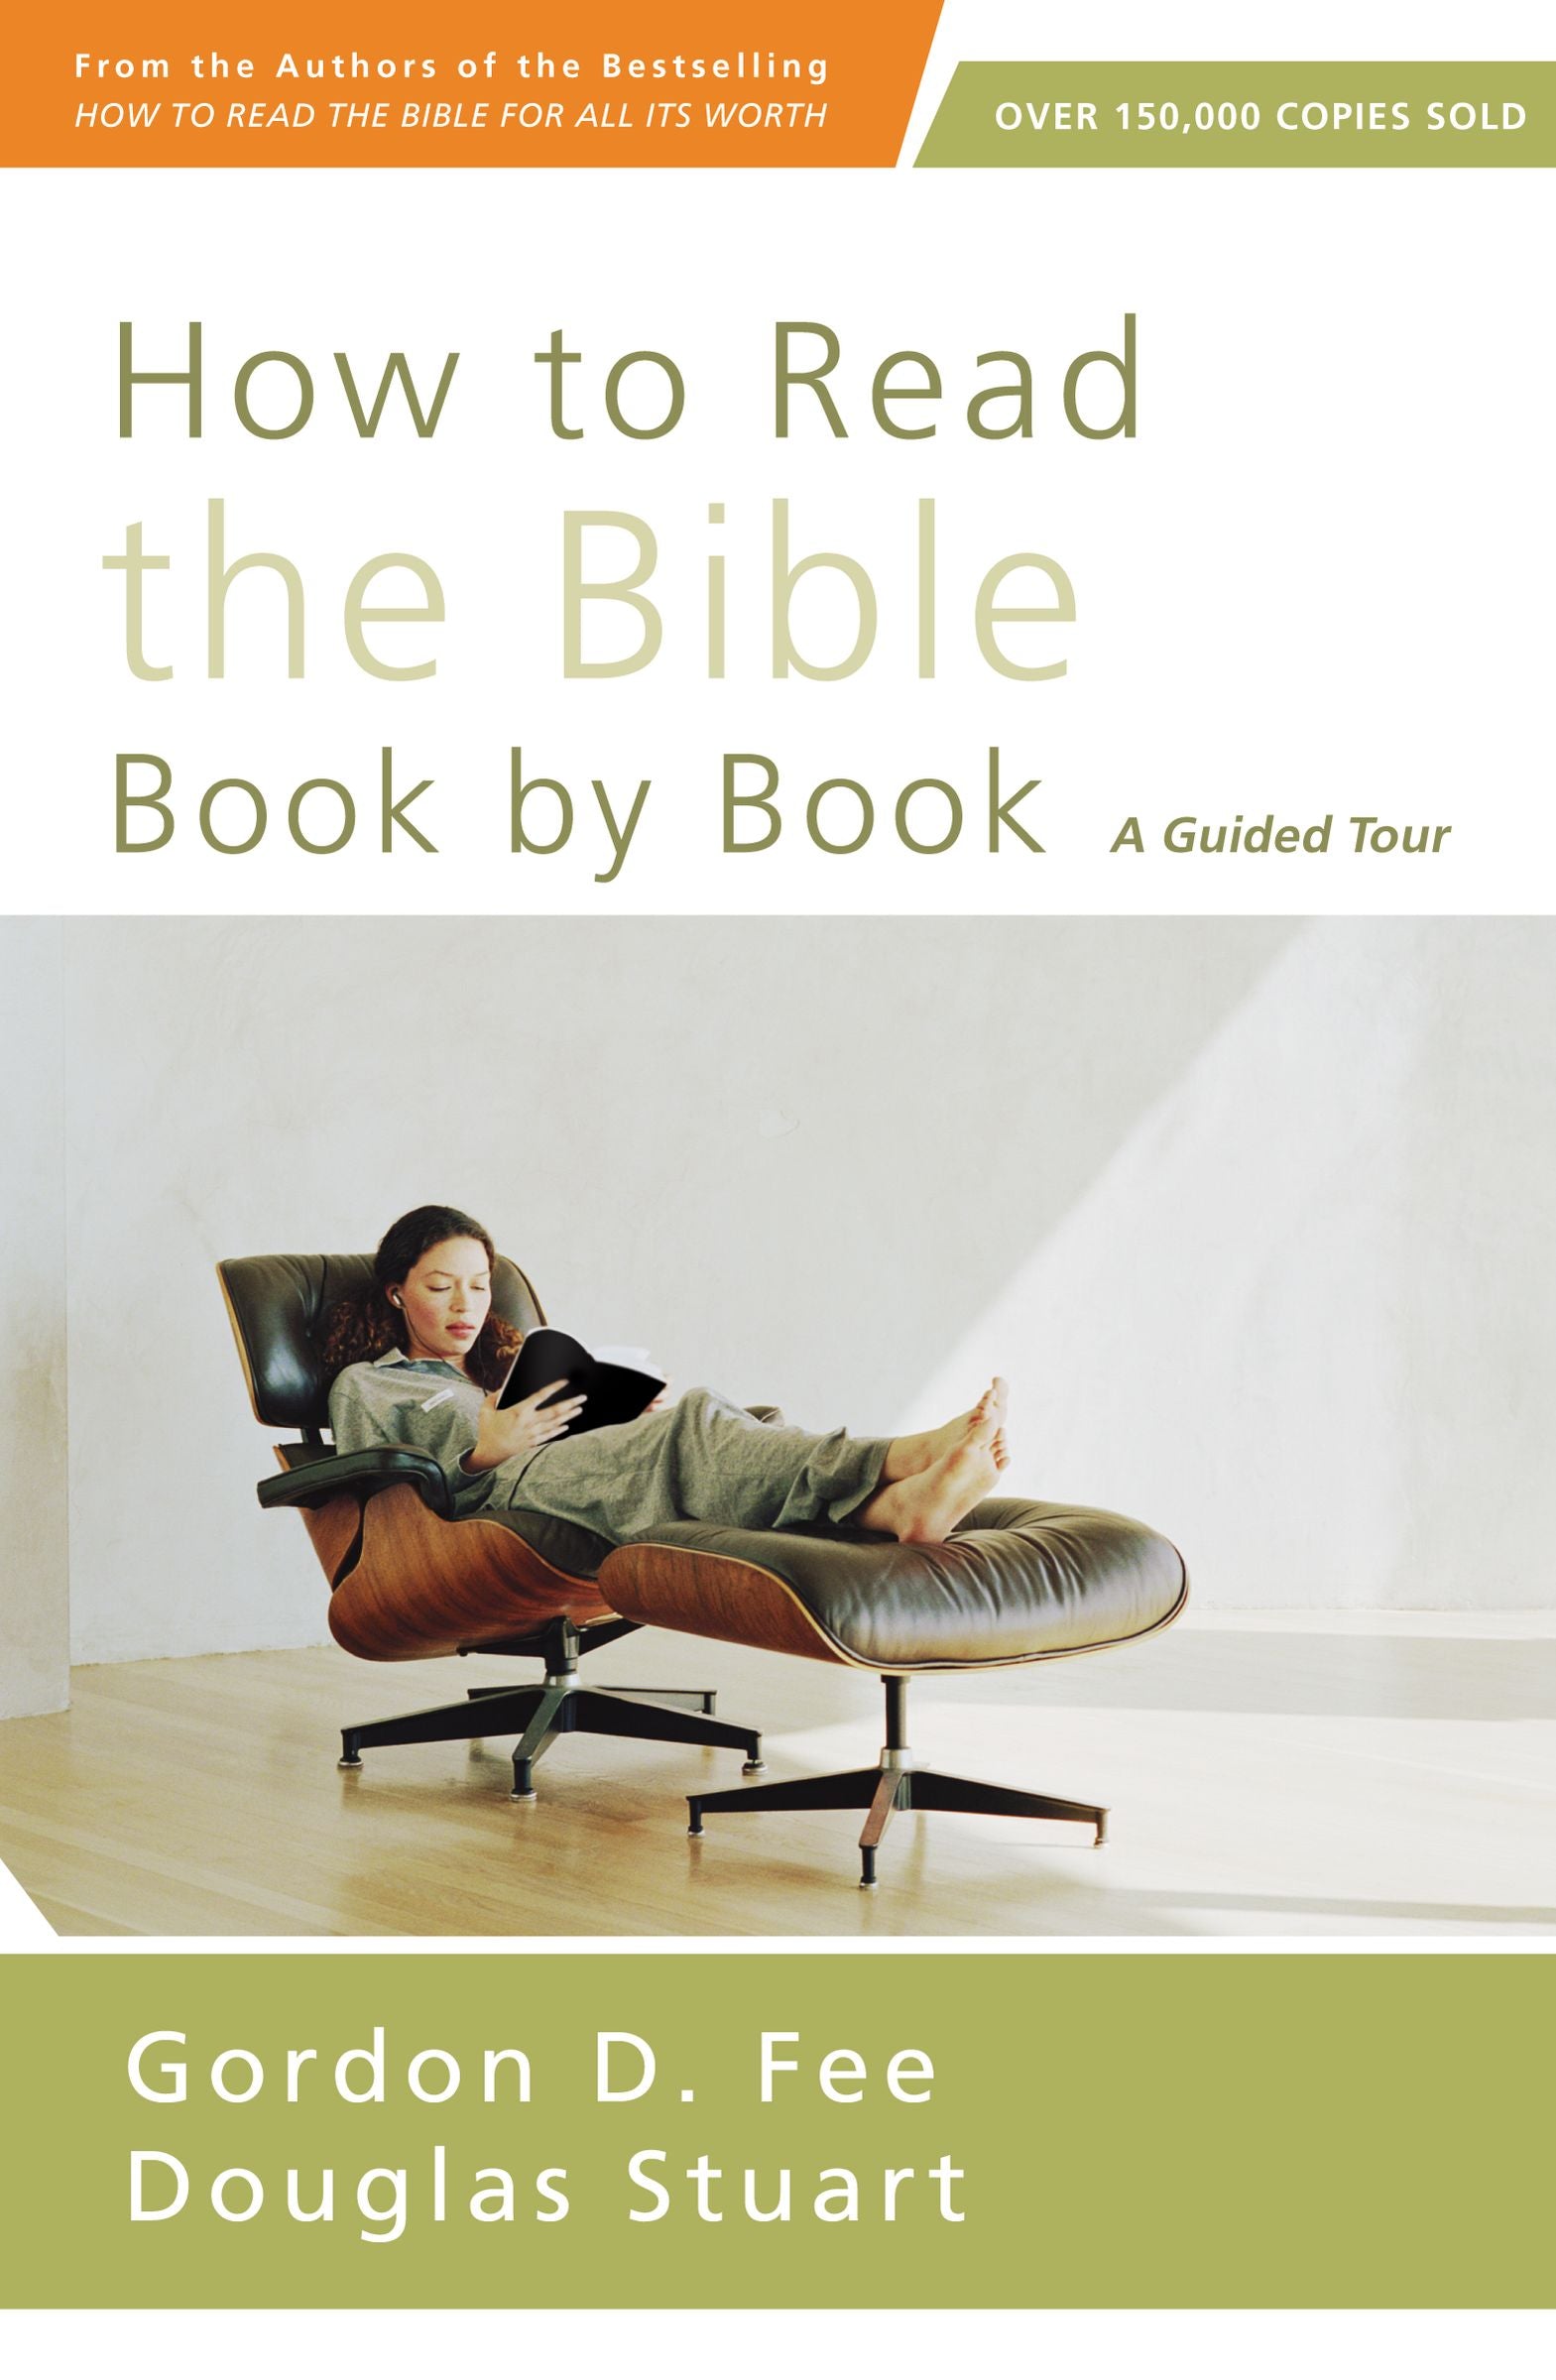 Image of How to Read the Bible Book by Book other